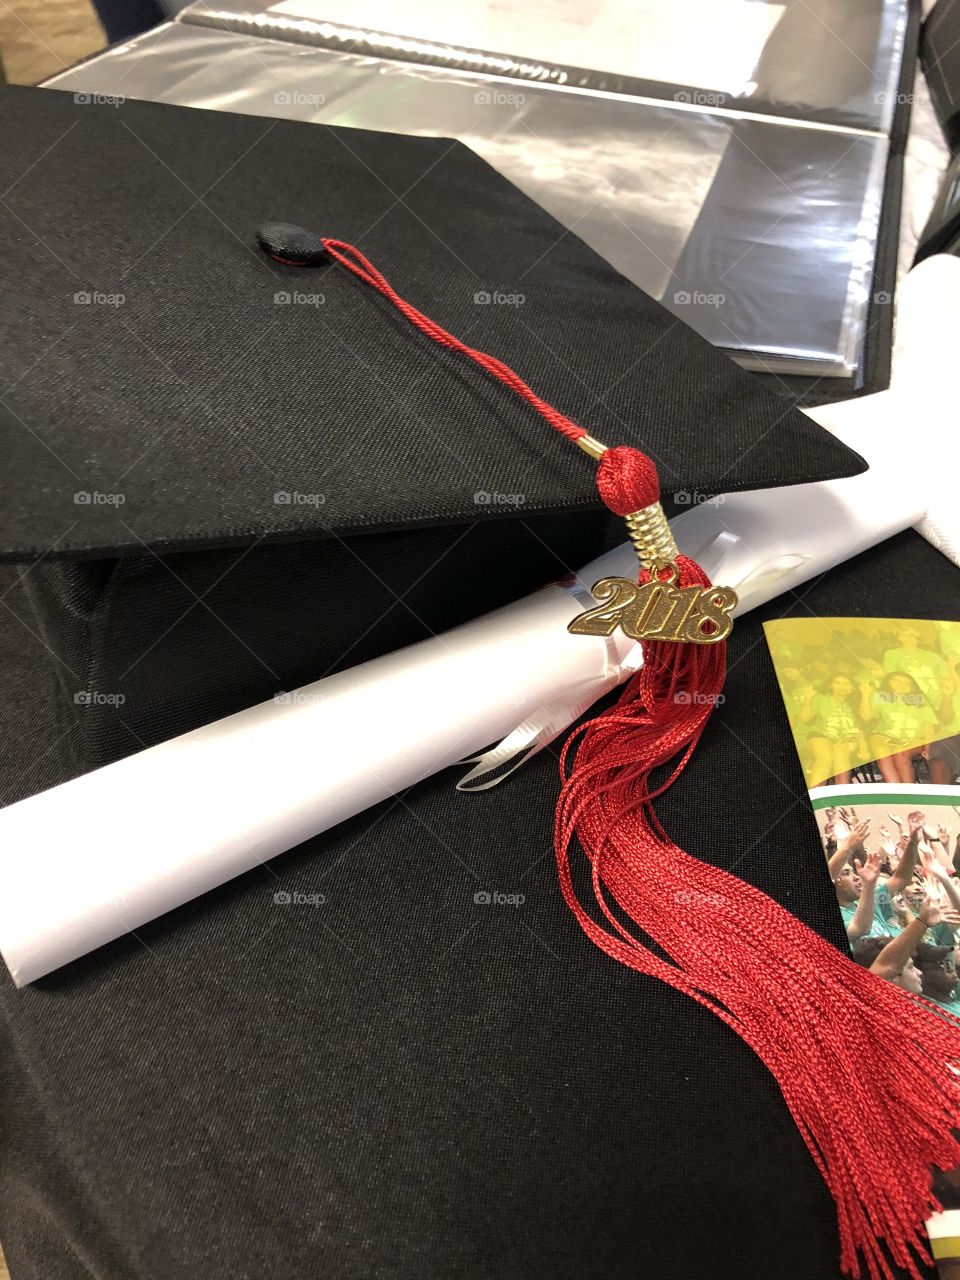 Black graduation hat with red tassel and white diploma for class of 2018